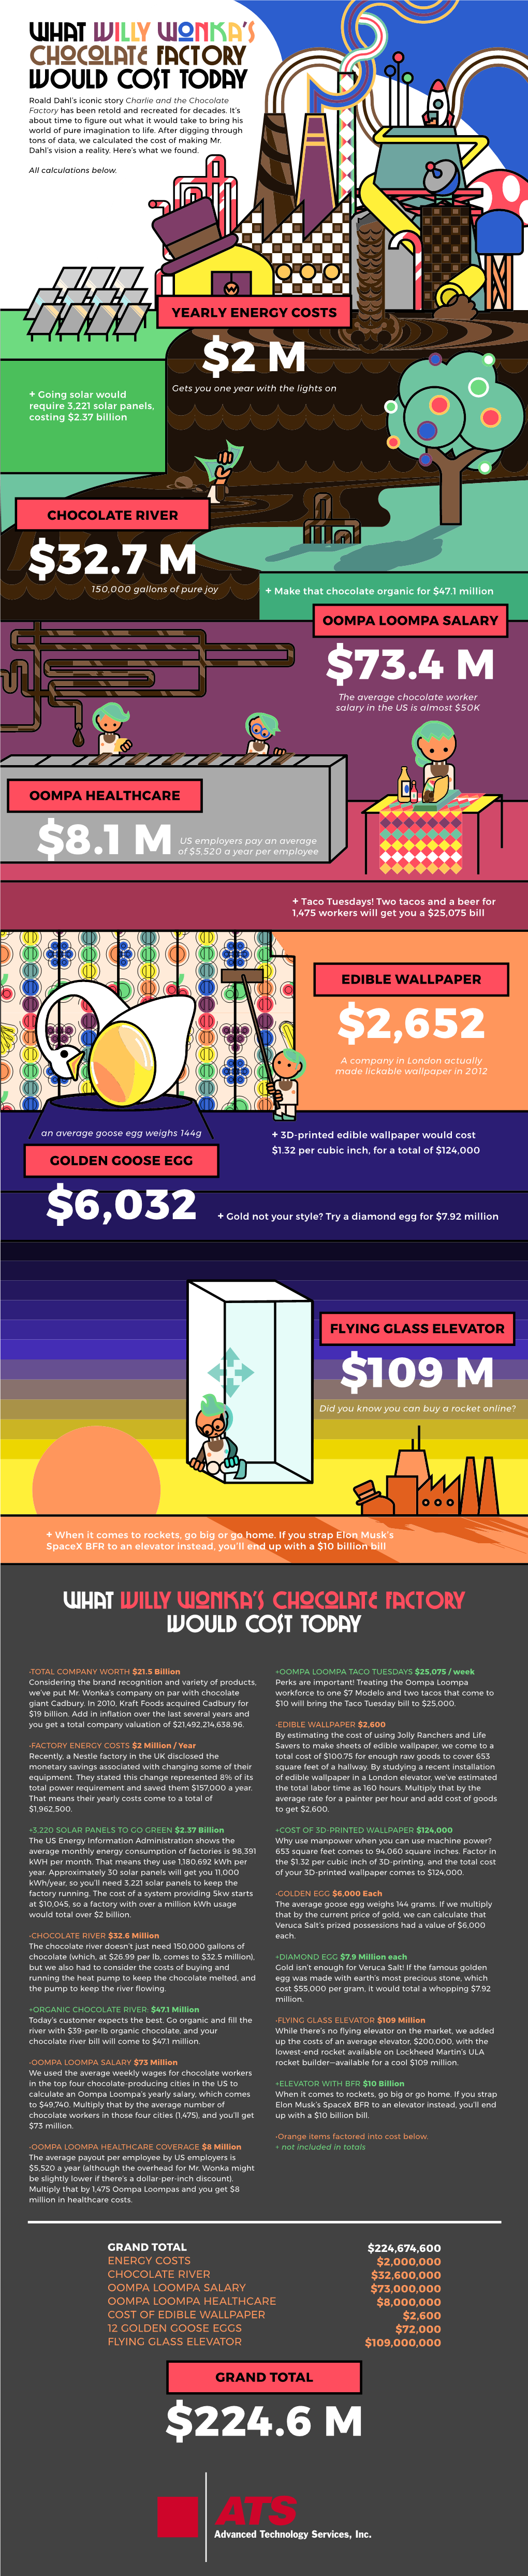 What Willy Wonka's Chocolate Factory Would Cost Today